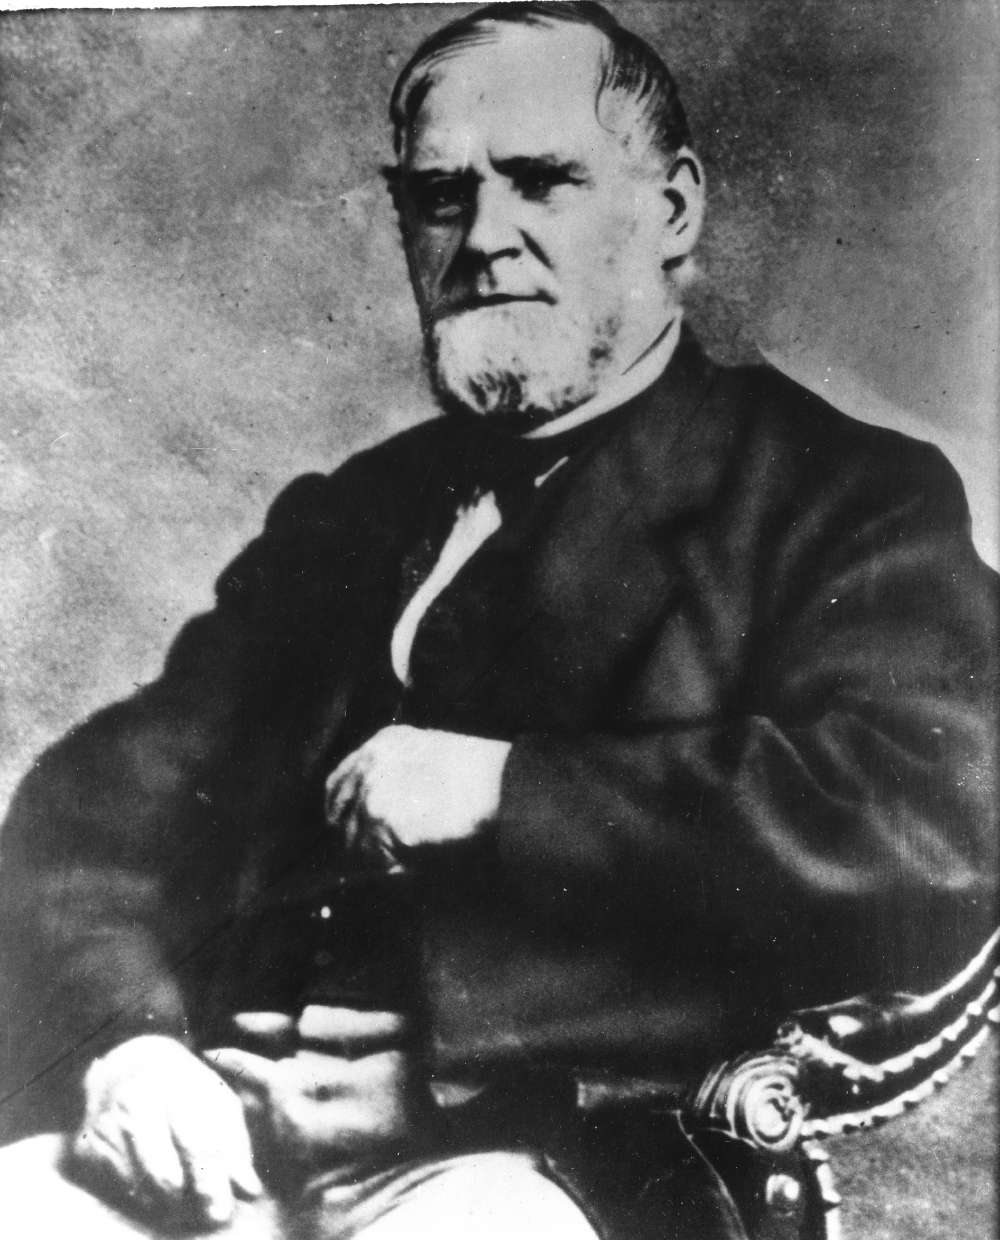 Portrait photograph of W. B. Ogden, the first president of Union Pacific Railroad